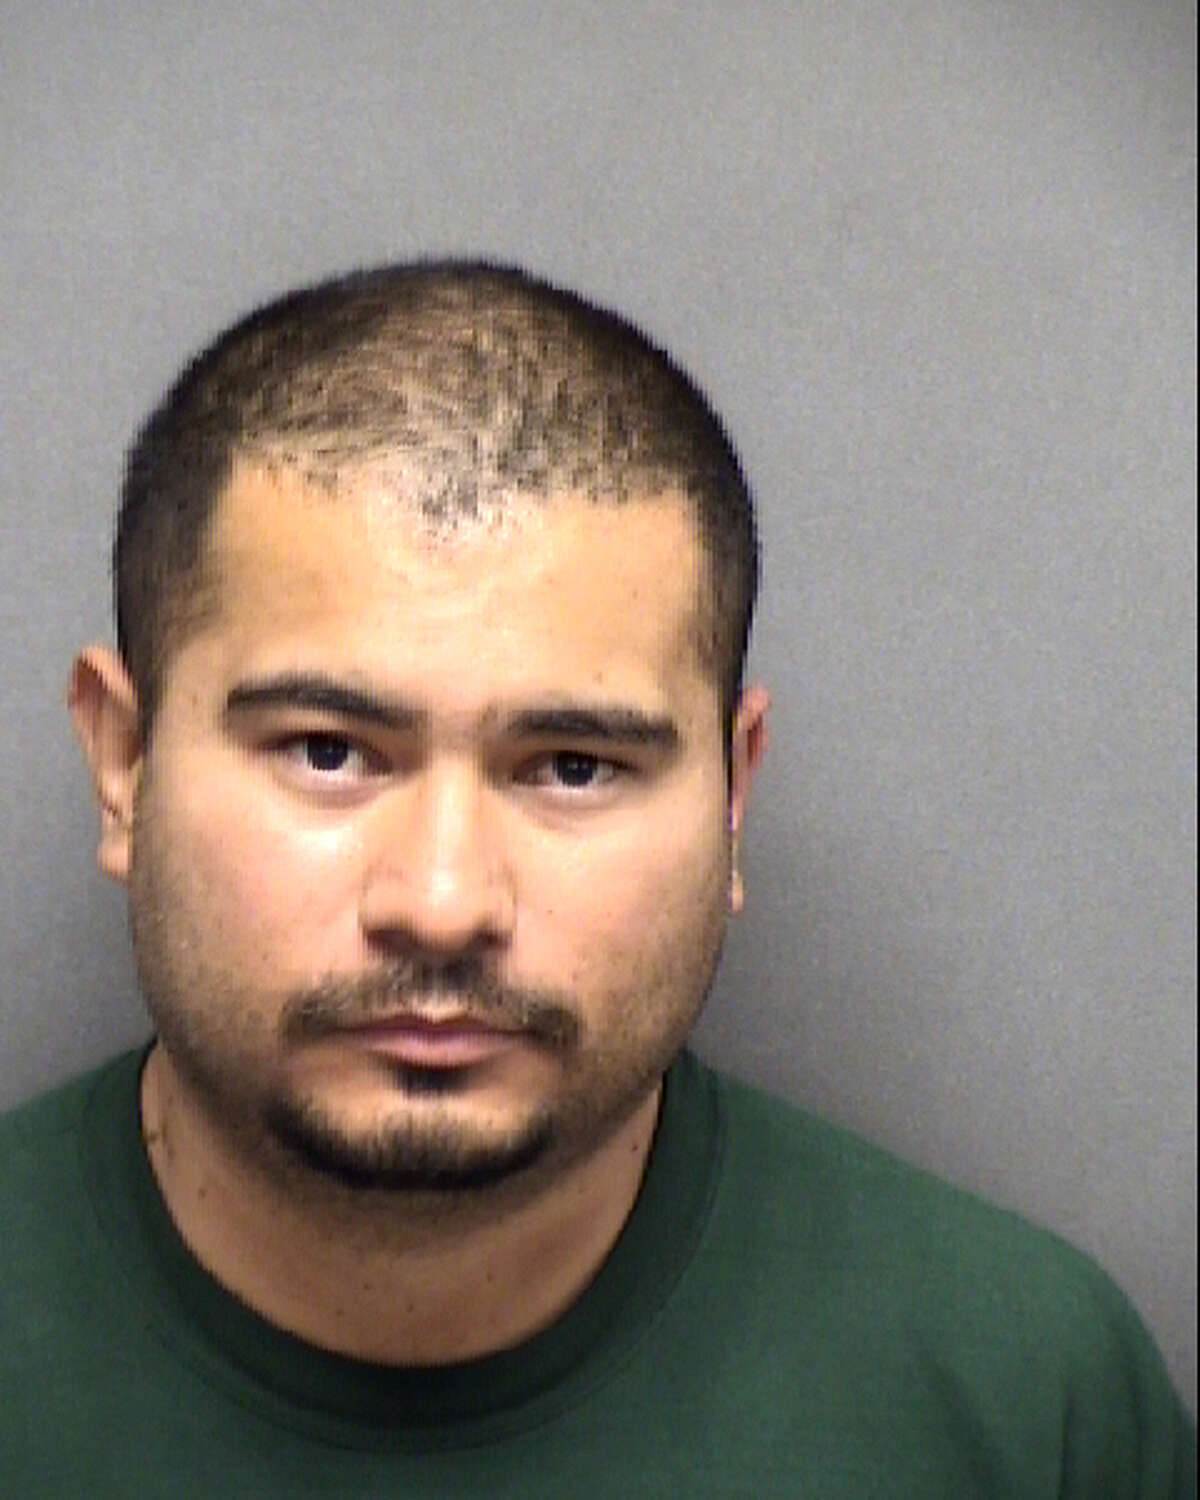 Reynaldo Uribe Jr., Reynaldo Uribe Jr., 35, was arrested for violation of an active protective order after San Antonio police officers found weapons during the execution of a search warrant.